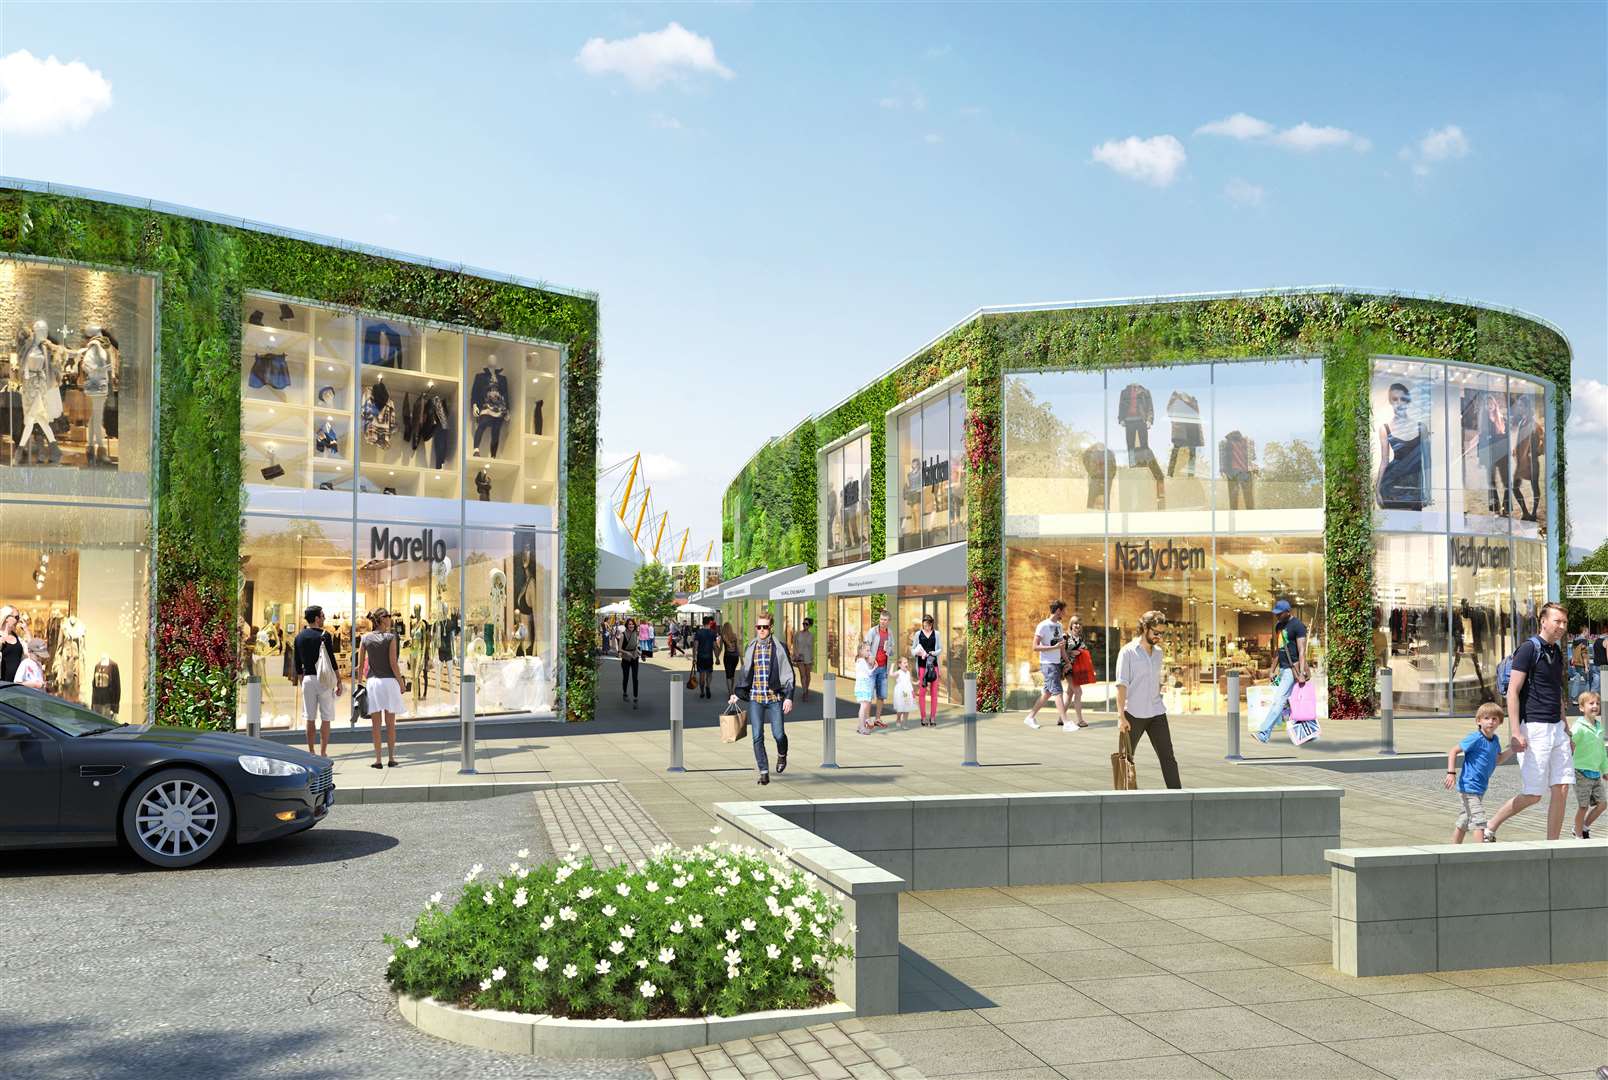 The Designer Outlet extension is set to be complete by September